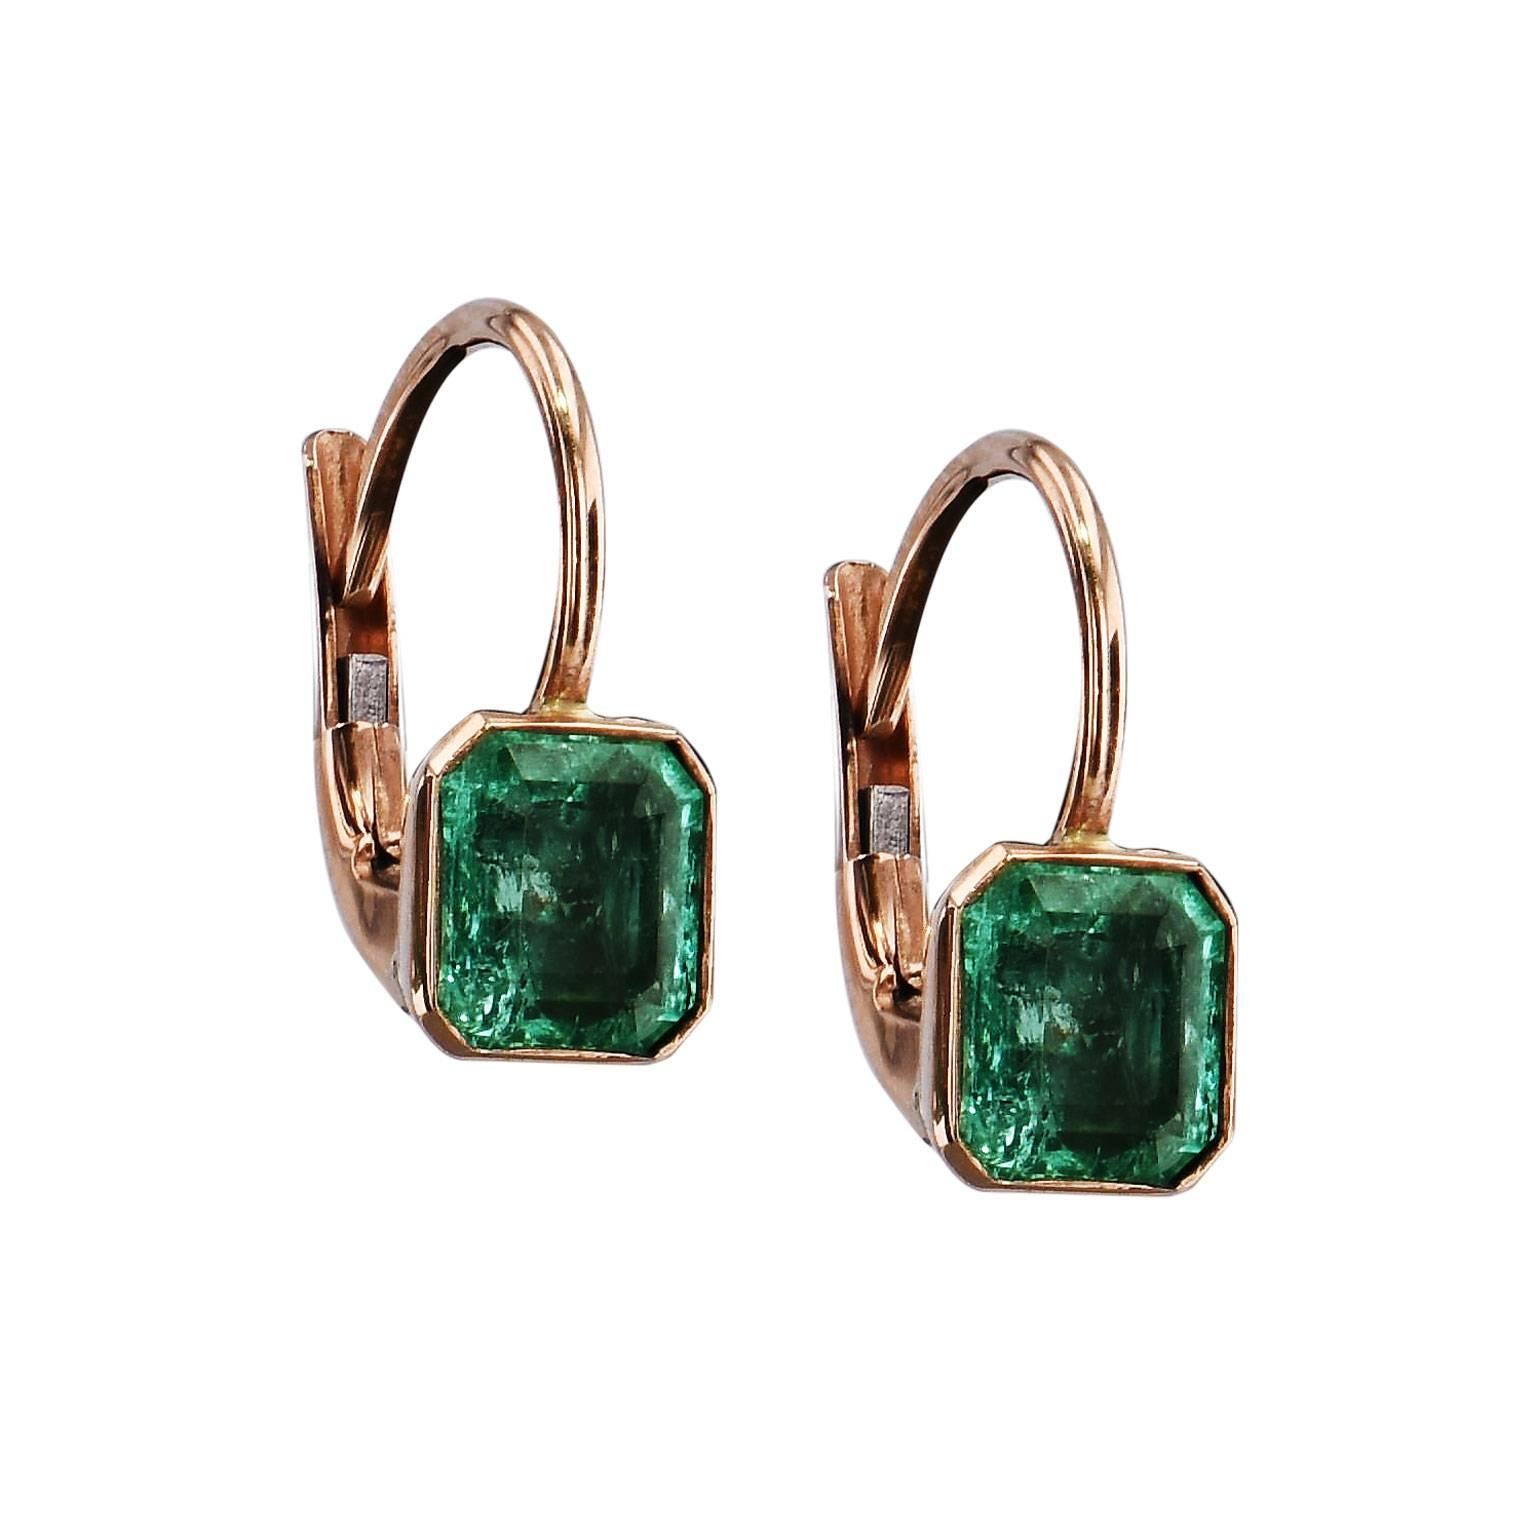 18 karat rose gold bezel-set 1.35 carat Colombian emeralds draw the eye in and chases one's gaze down each step of the emerald cuts. These handmade lever-back earrings wont easily be forgotten.